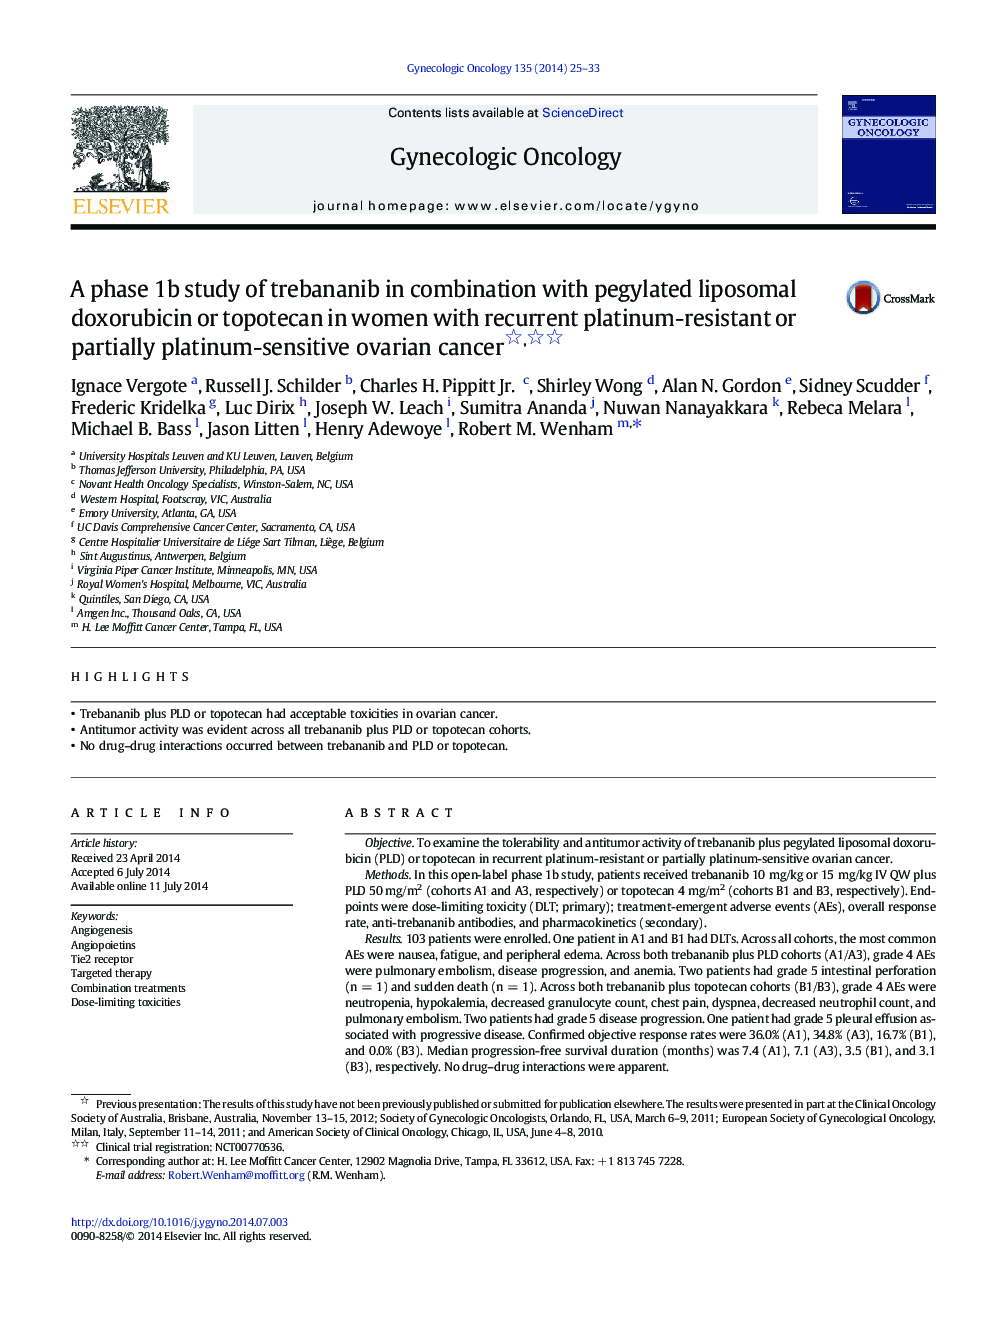 A phase 1b study of trebananib in combination with pegylated liposomal doxorubicin or topotecan in women with recurrent platinum-resistant or partially platinum-sensitive ovarian cancer